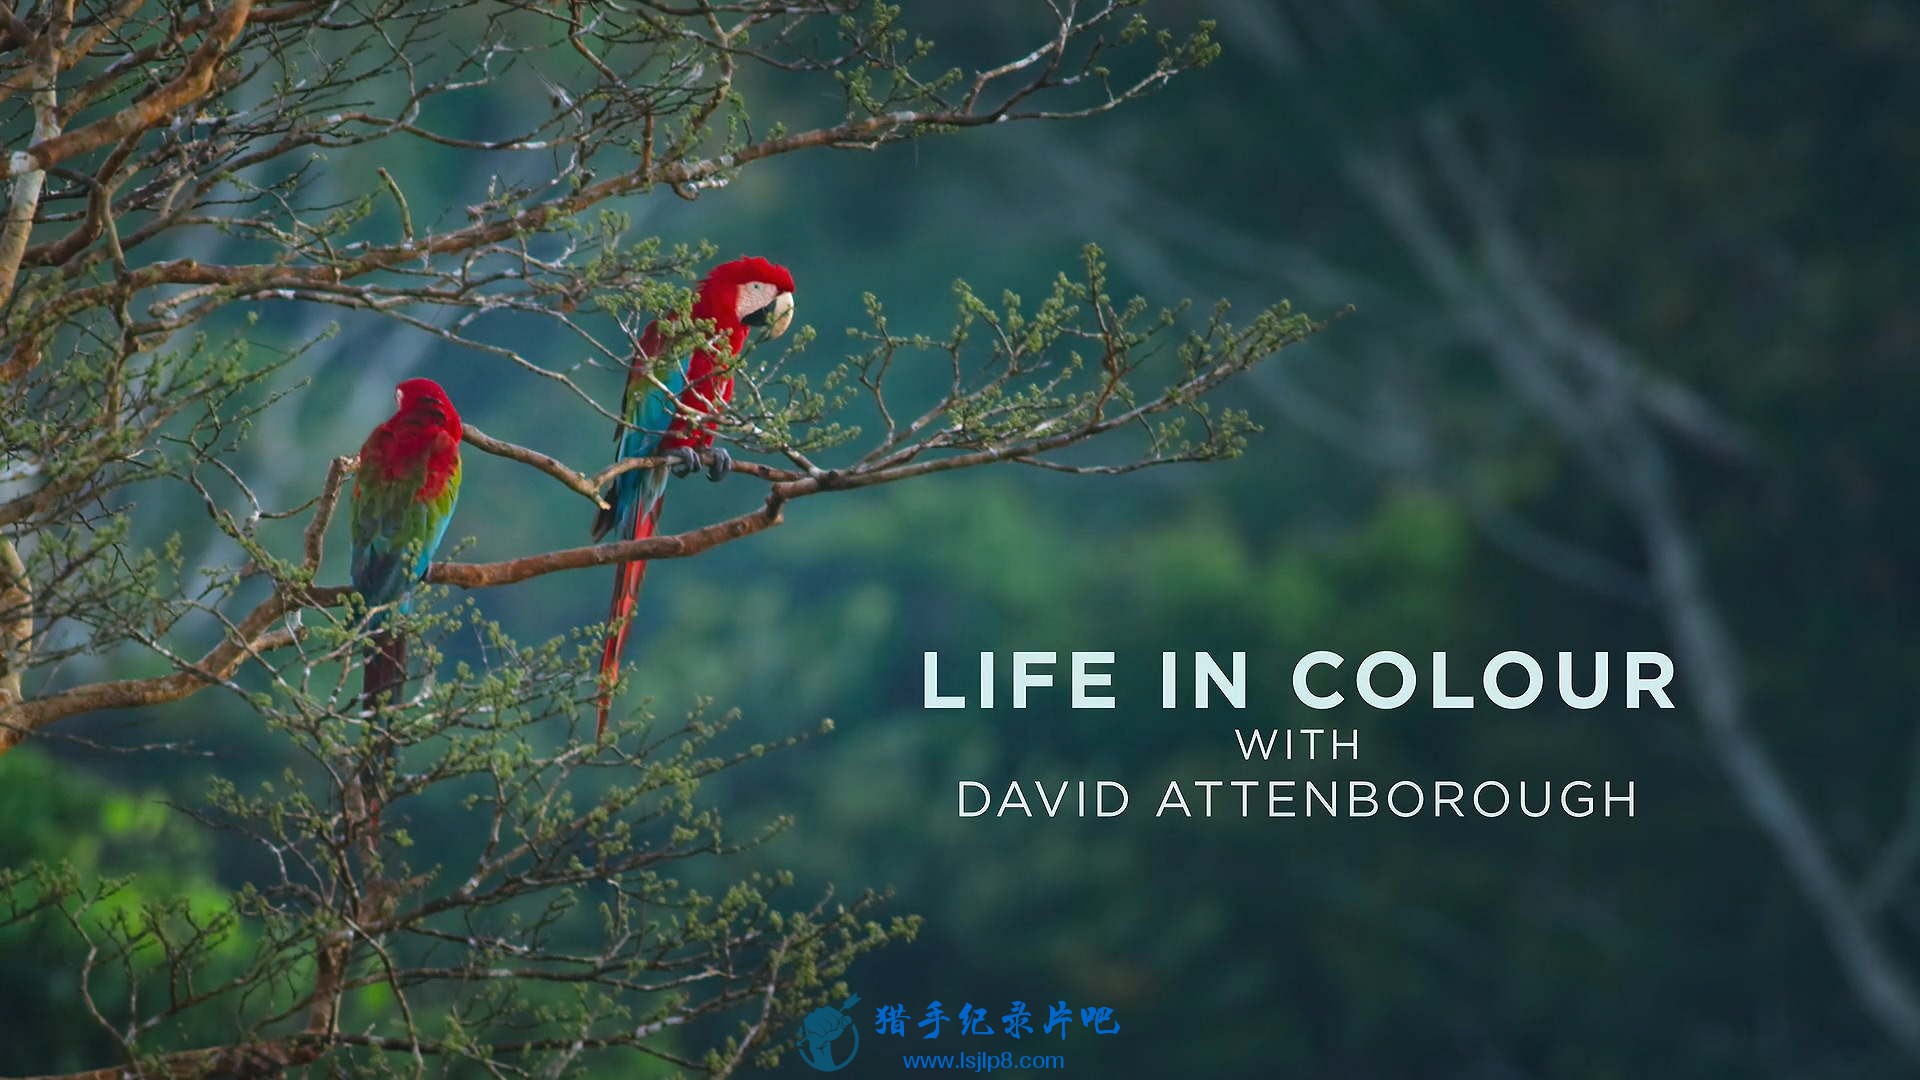 Life.in.Colour.with.David.Attenborough.S01E01.Seeing.in.Colour.1080p.NF.WEB-DL.D.jpg